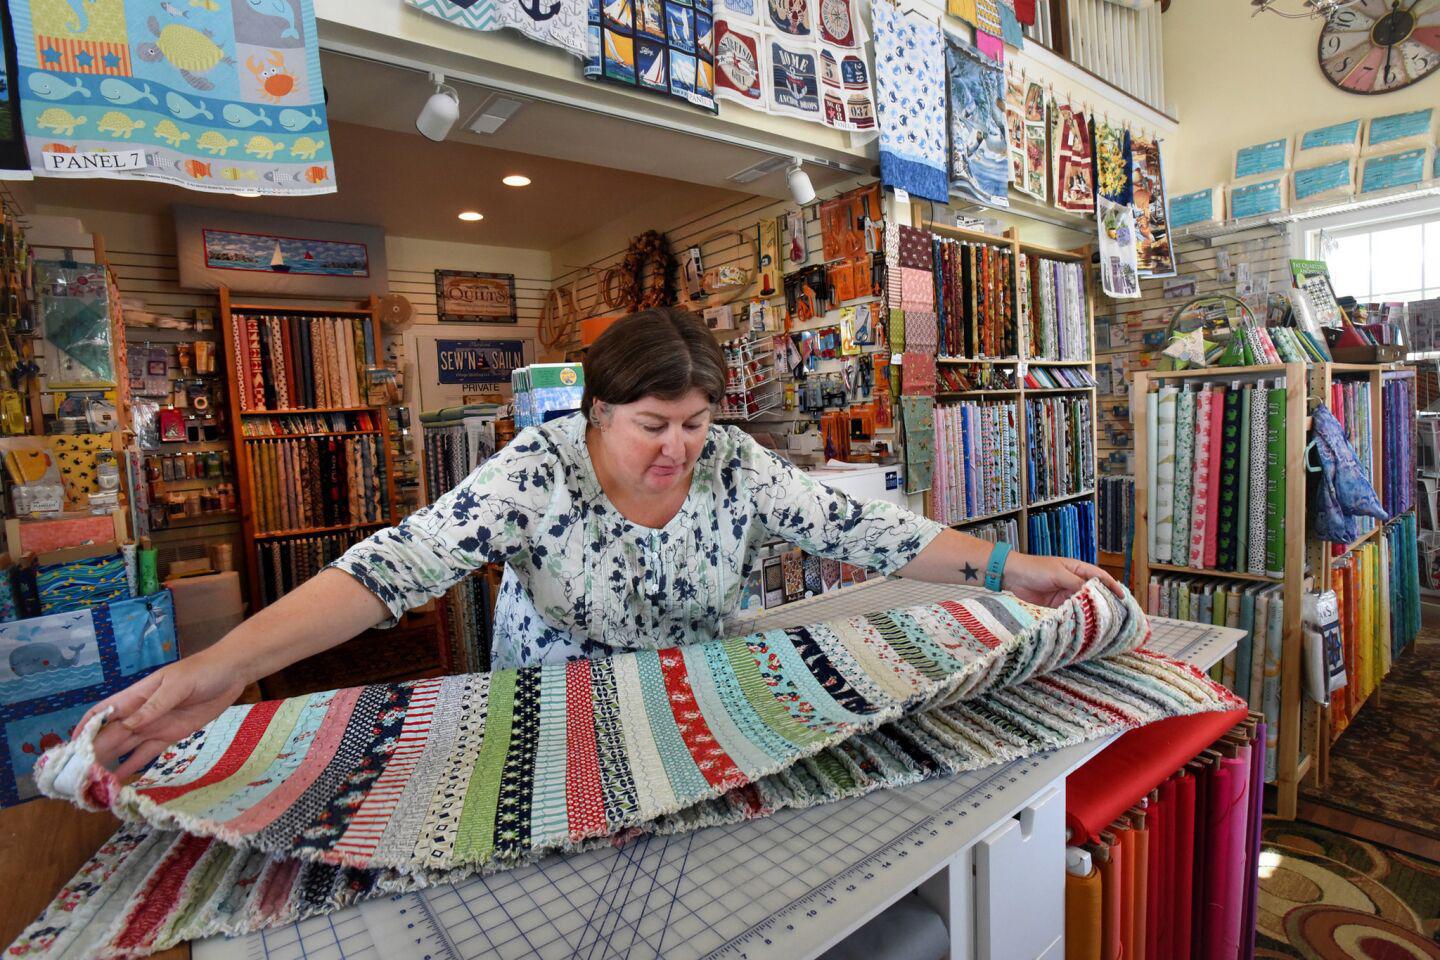 Stop by Village Quilting for for unique fabrics and quilting supplies